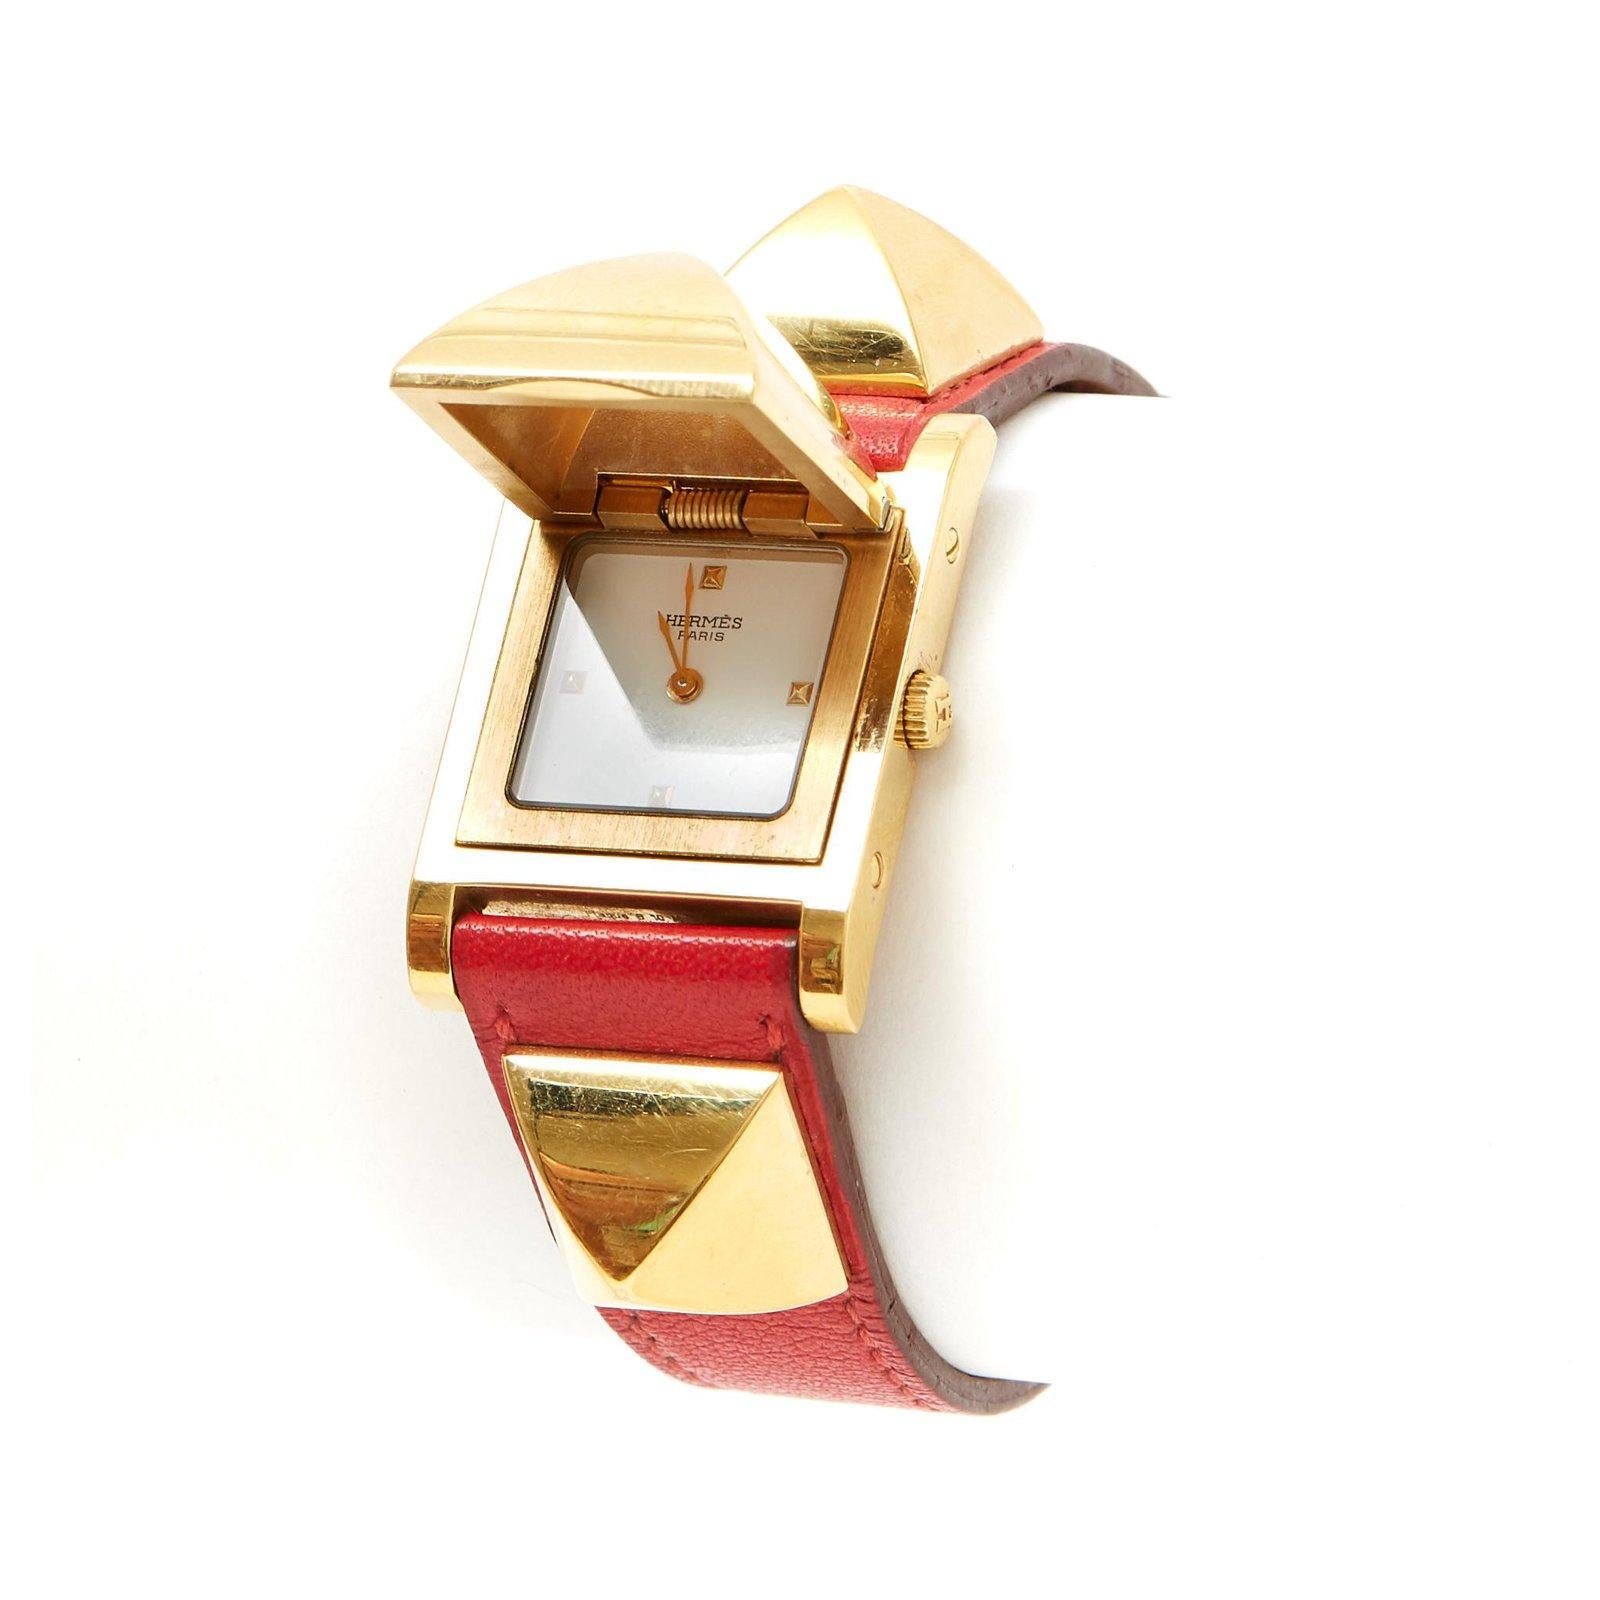 Hermès model Médor watch, steel and gold-plated metal case, white dial, gold-plated metal stud indexes at 3, 6, 9 and 12 o'clock, quartz movement, coral red leather strap (Hermès 